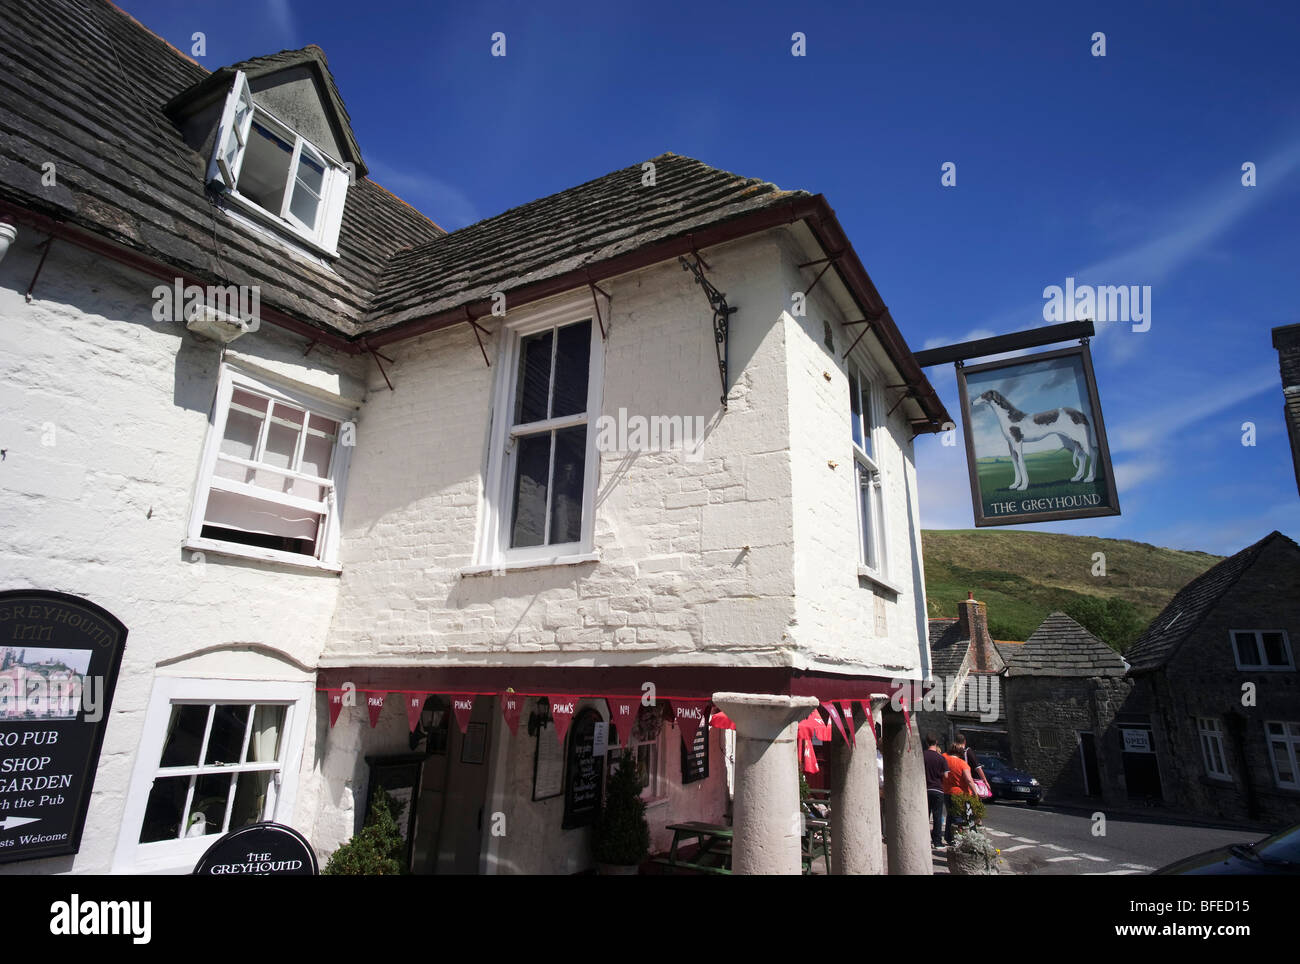 the greyhound pub corfe castle vllage from the purbeck way long distance footpath - the isle of purbeck, dorset, england Stock Photo